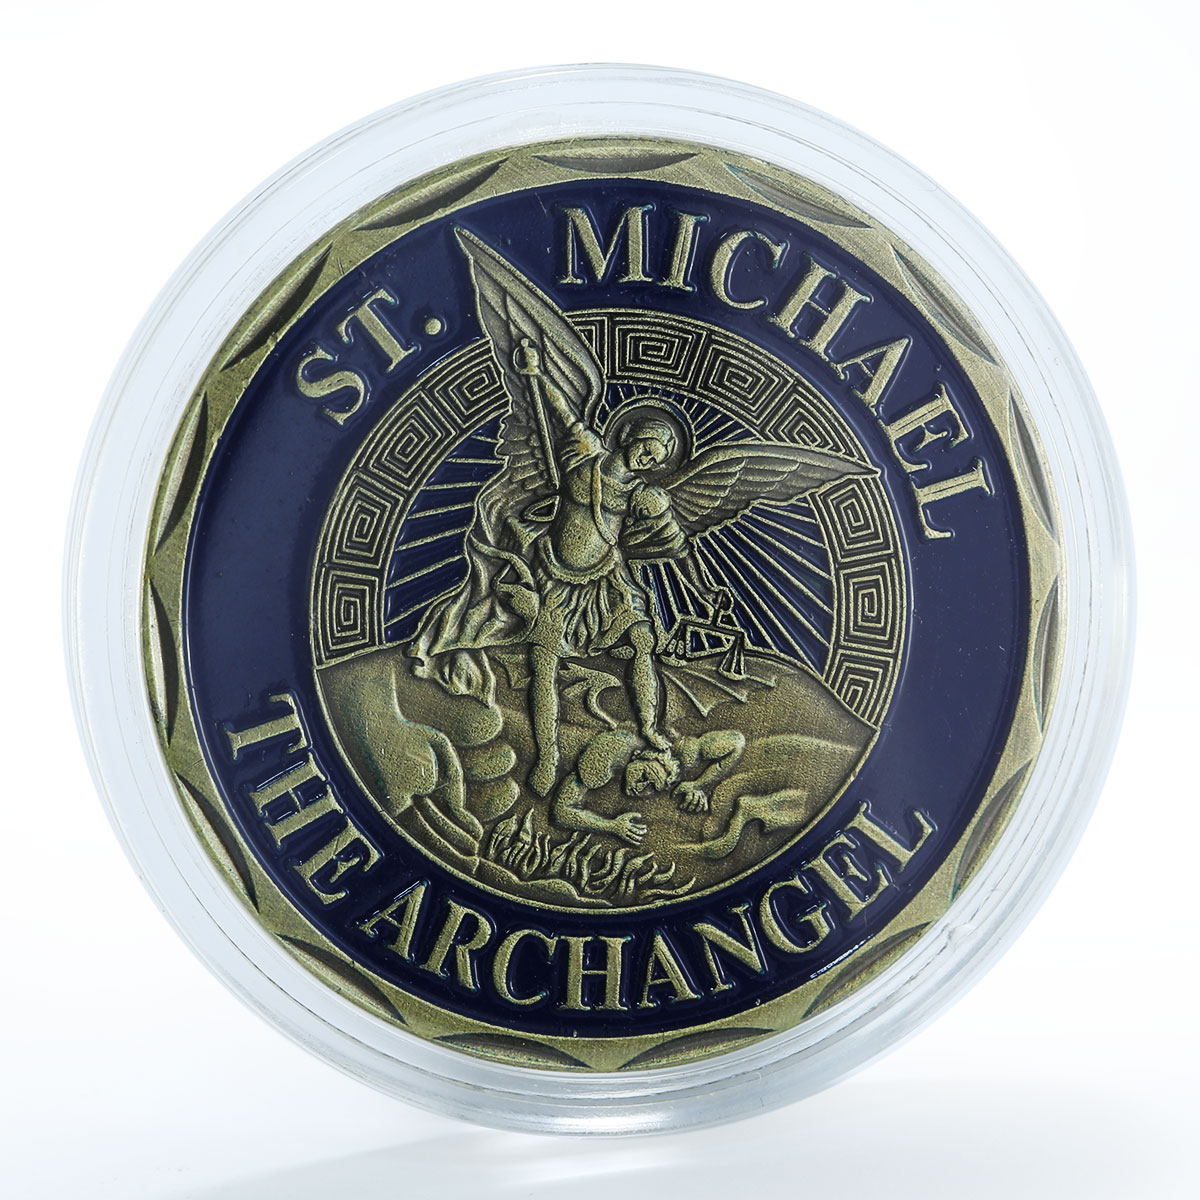 USA Air Force Excellence Aircrafts Stealth Pilot The Archangel St. Michael token